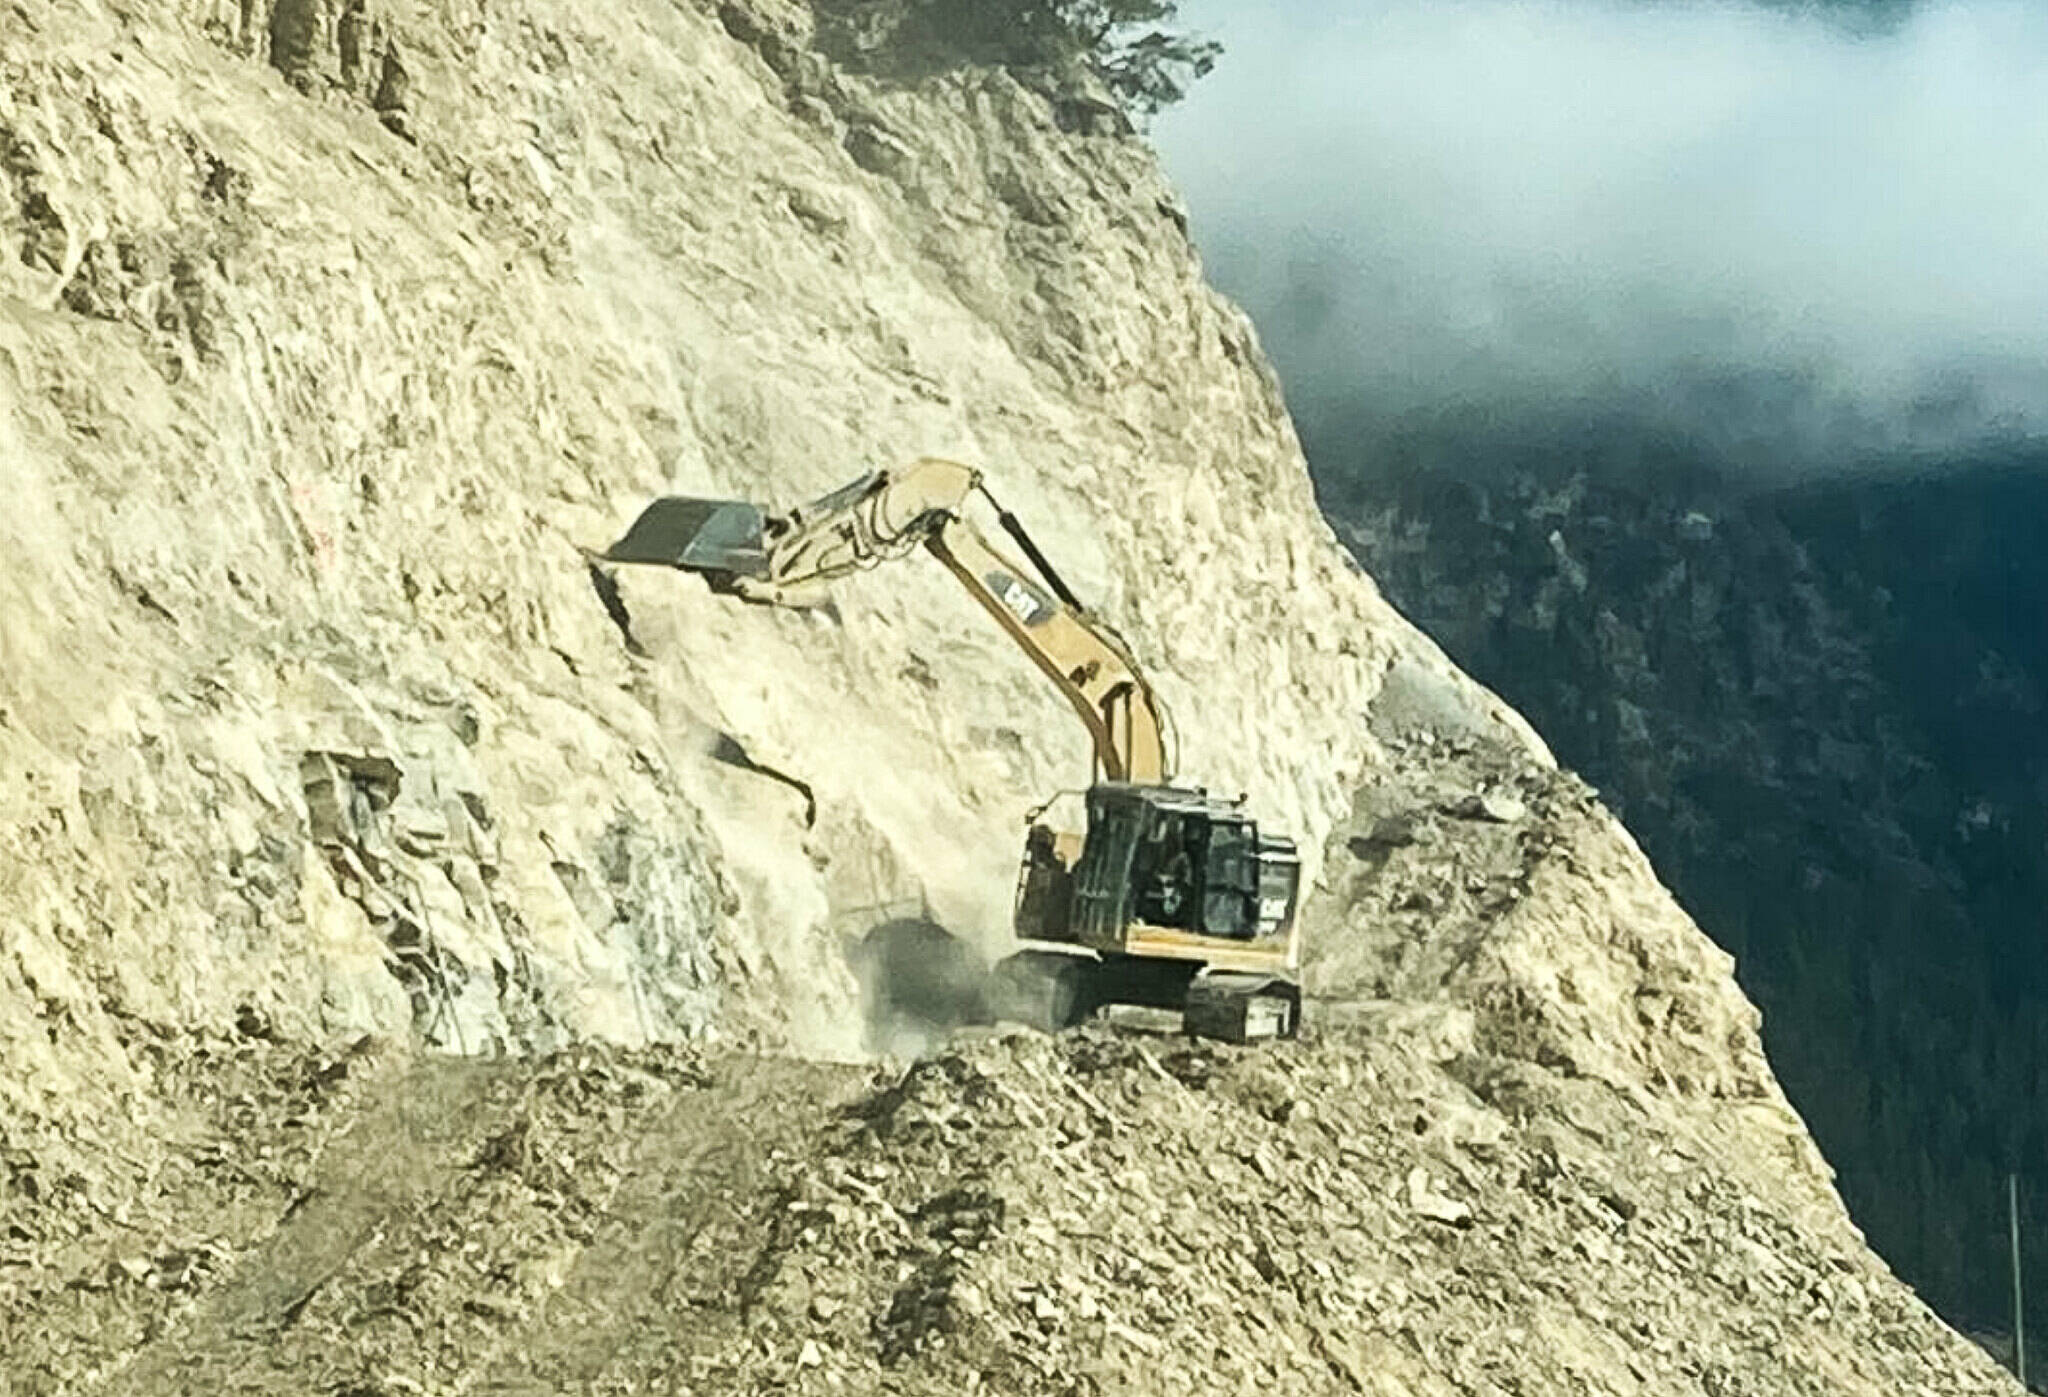 Construction is well underway on some of the permanent infrastructure surrounding Phase 4 of the Kicking Horse Canyon Project. Pictured above is an excavator working on the project, scaling the rock face at ���Cut 2��� overlooking the future Lynx viaduct in the western portion of the project zone. (MoTI photo)